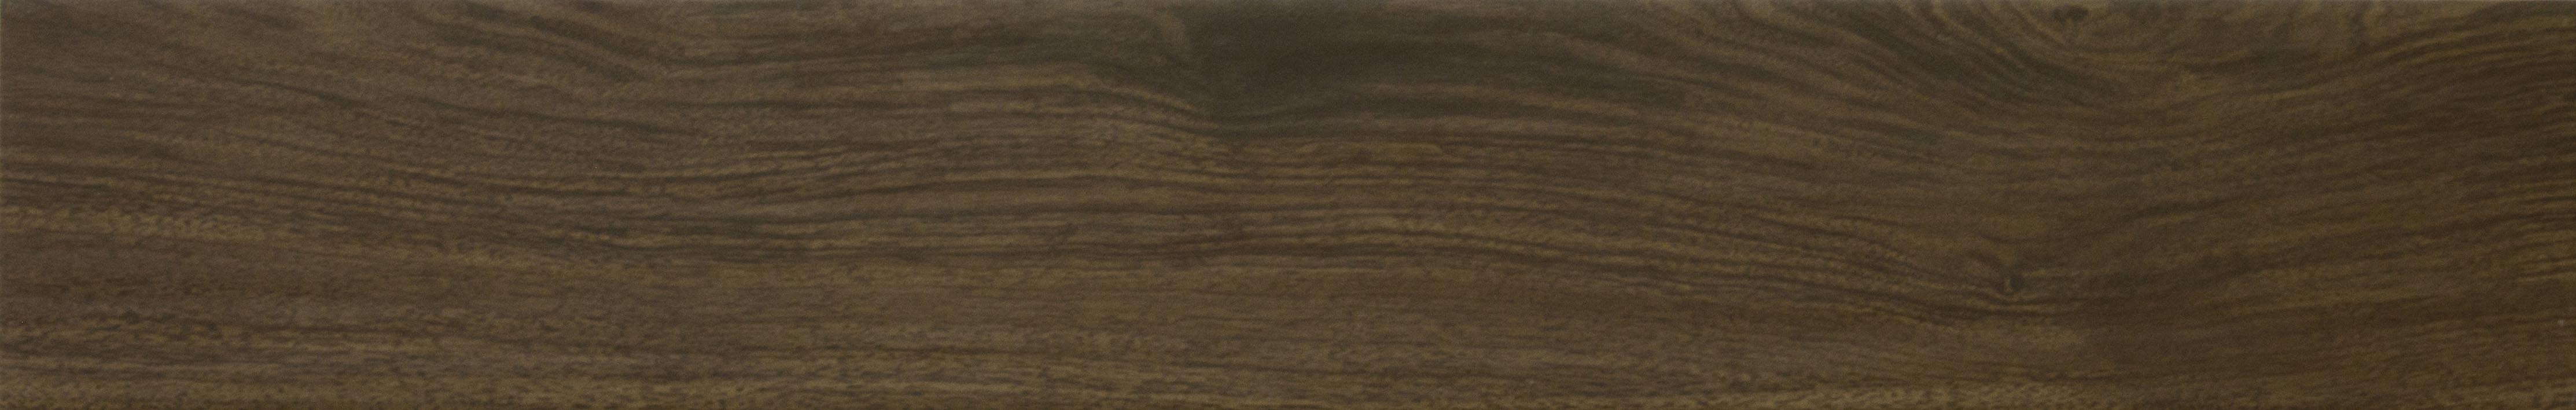 Specialty Tile Products Frontier Walnut